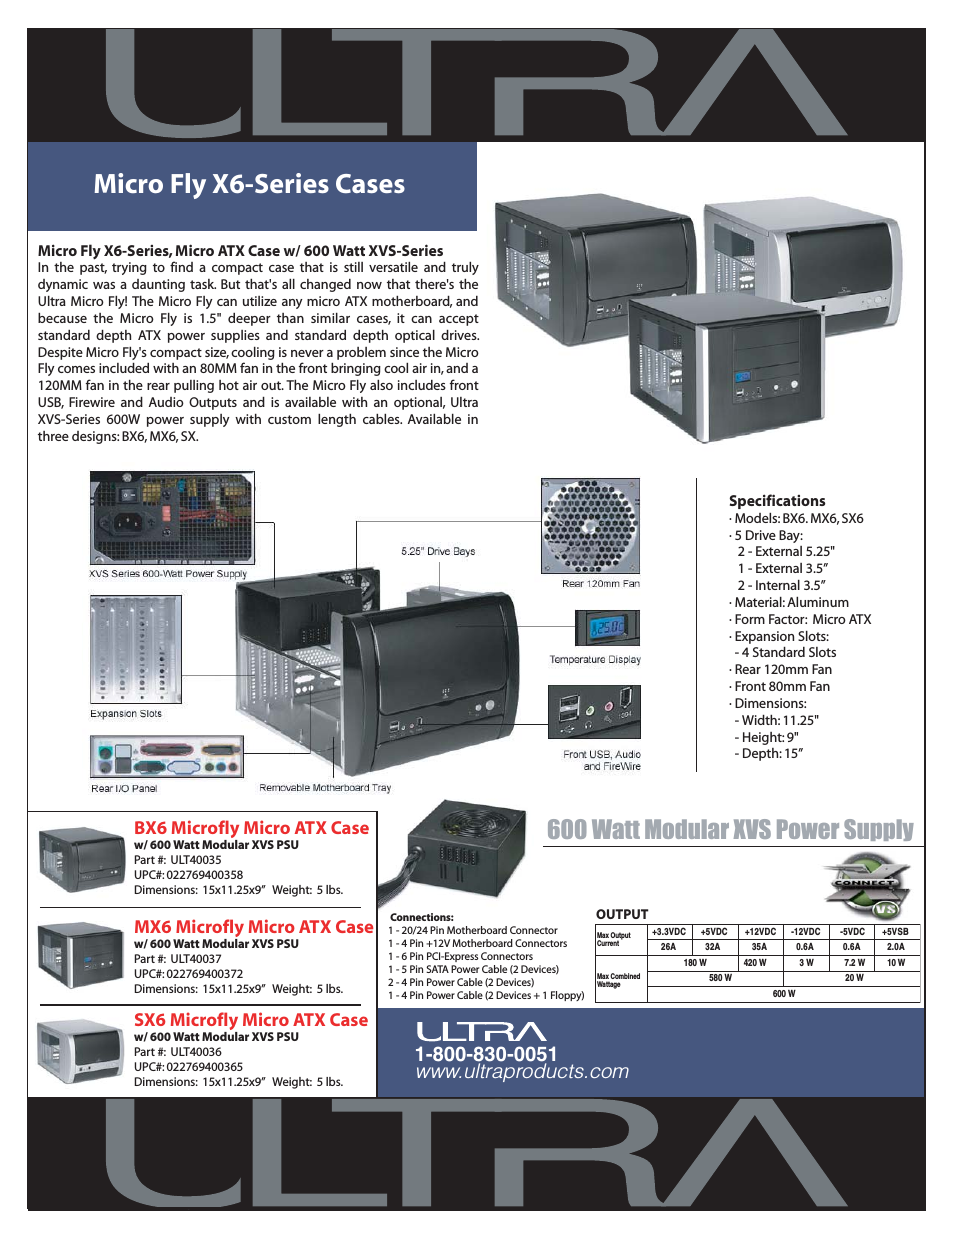 Micro Fly X6-Series Cases BX6